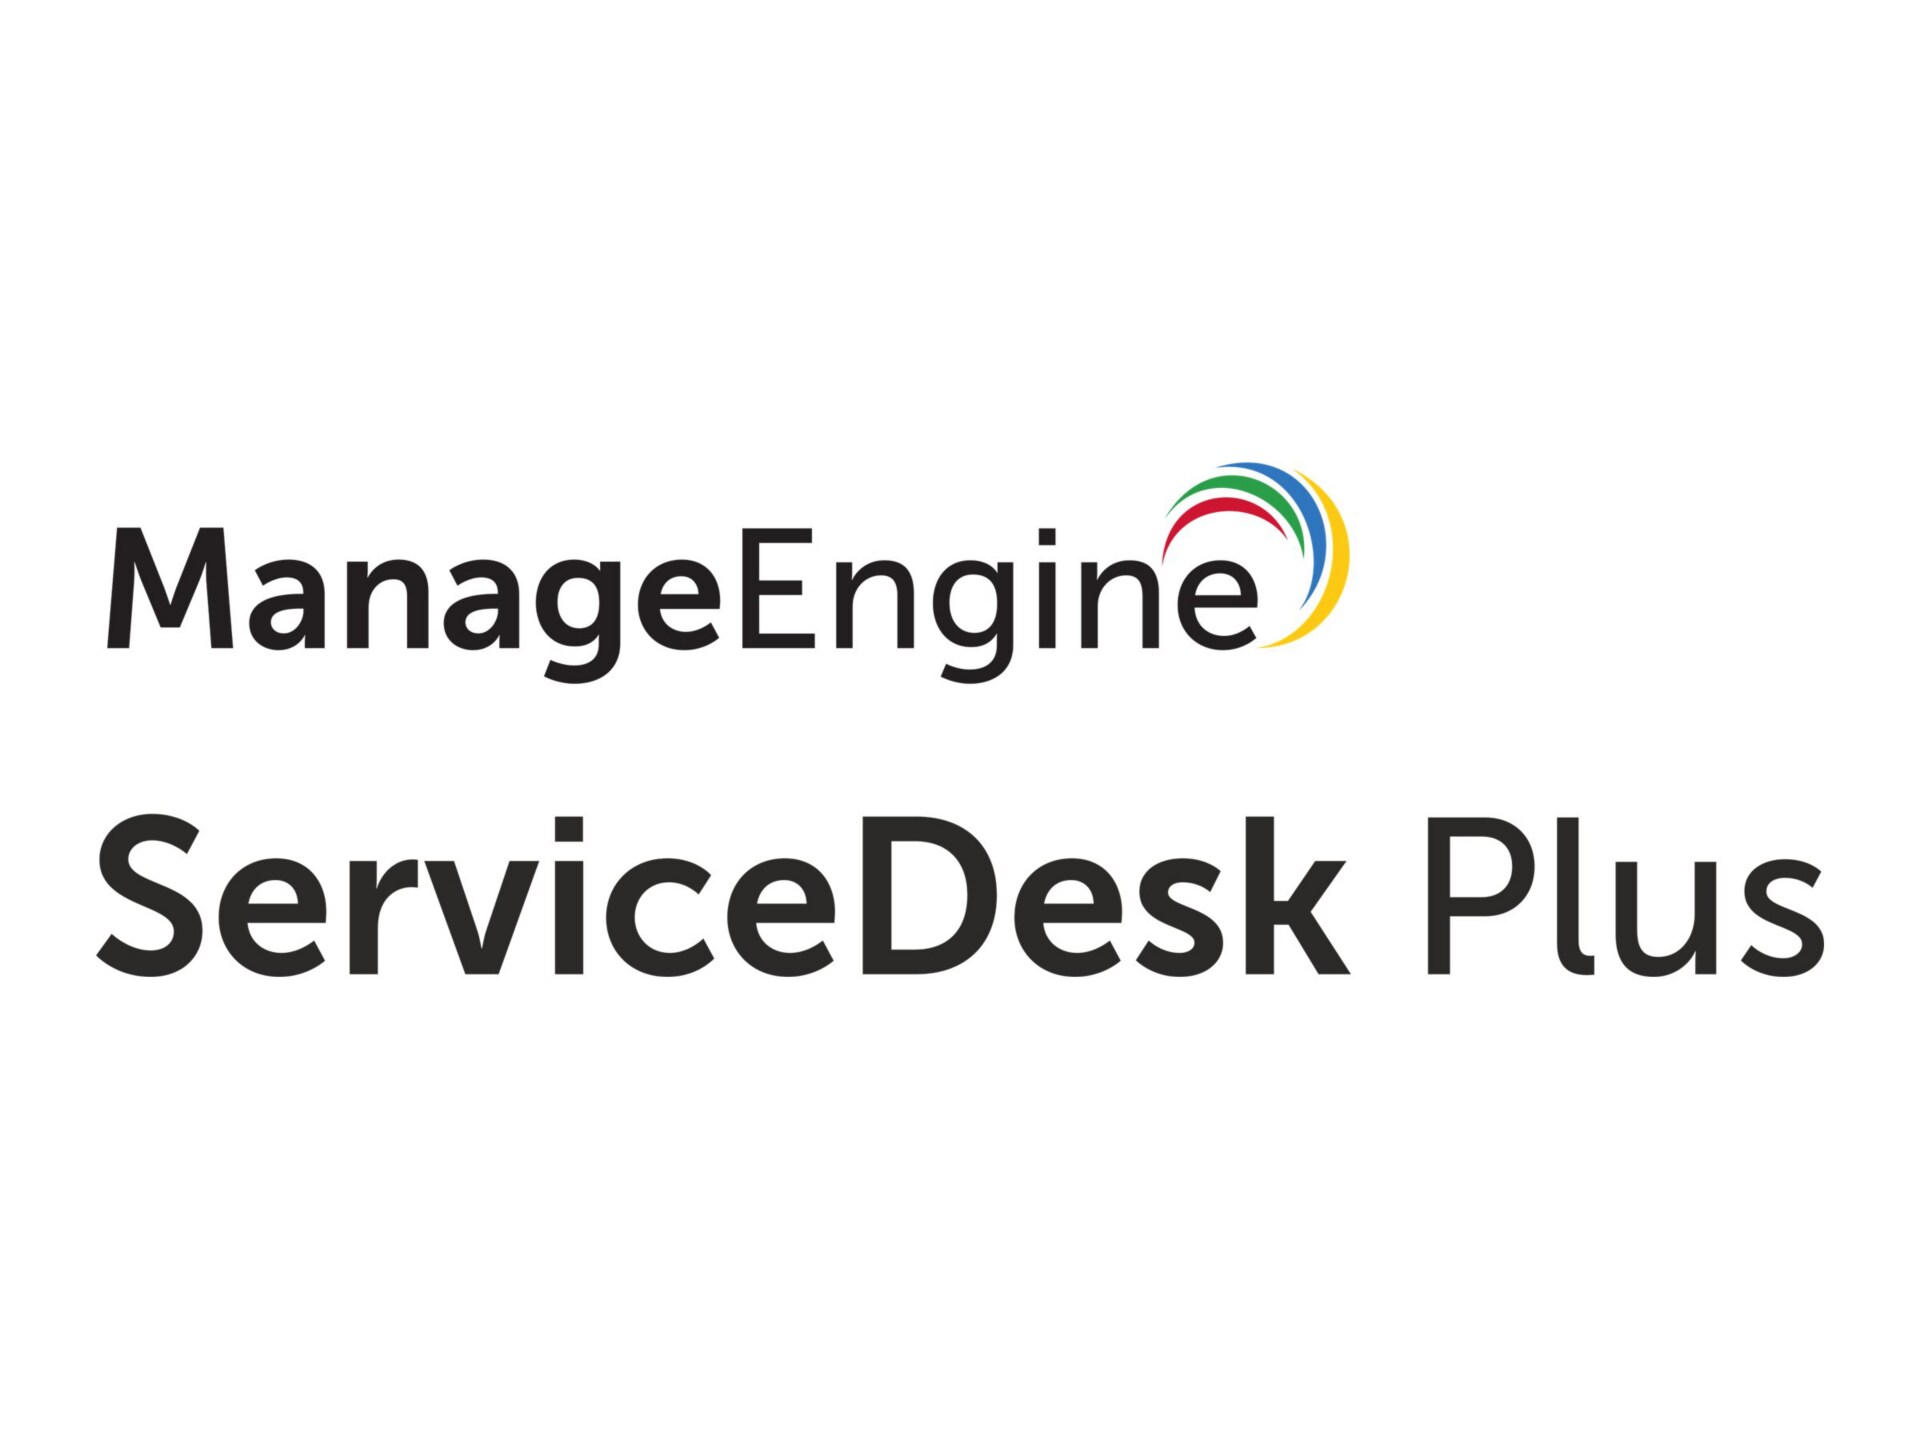 ManageEngine ServiceDesk Plus Cloud Professional Edition - subscription lic